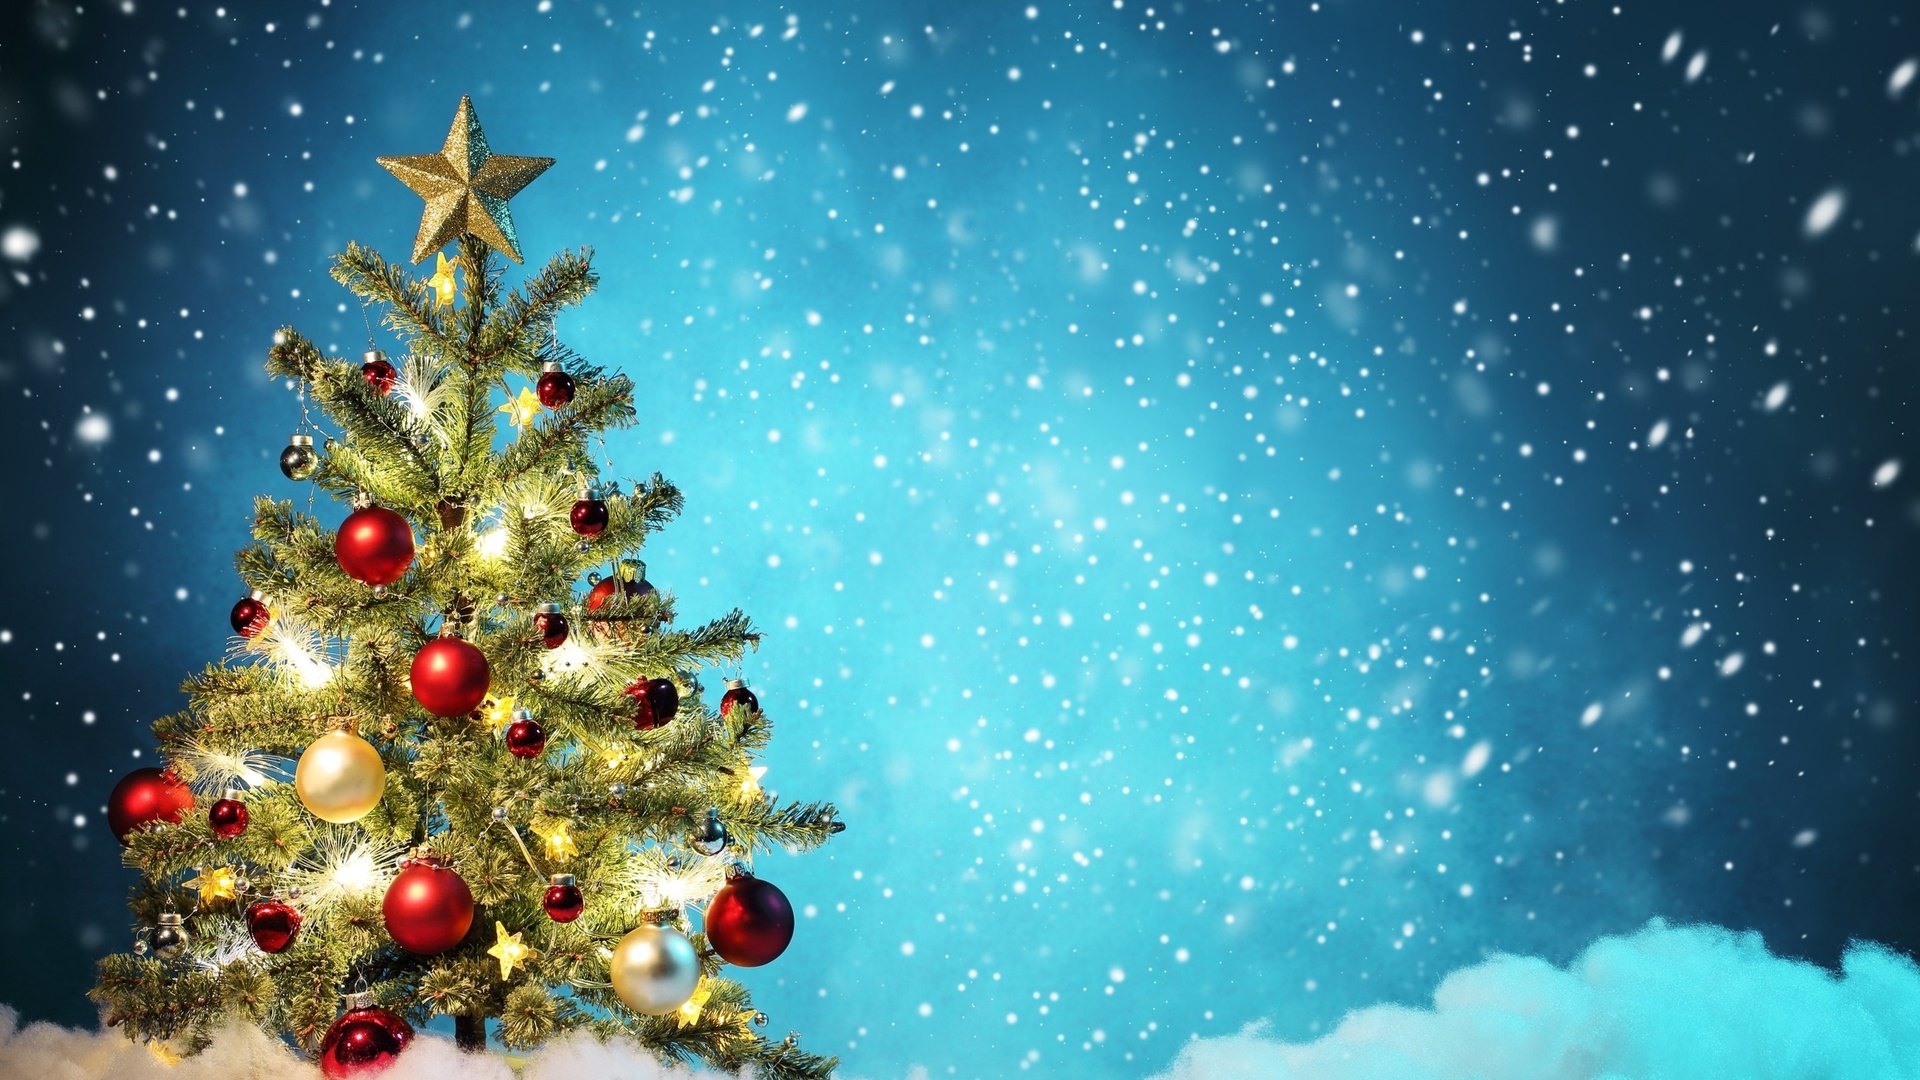 Christmas Backgrounds Free Download